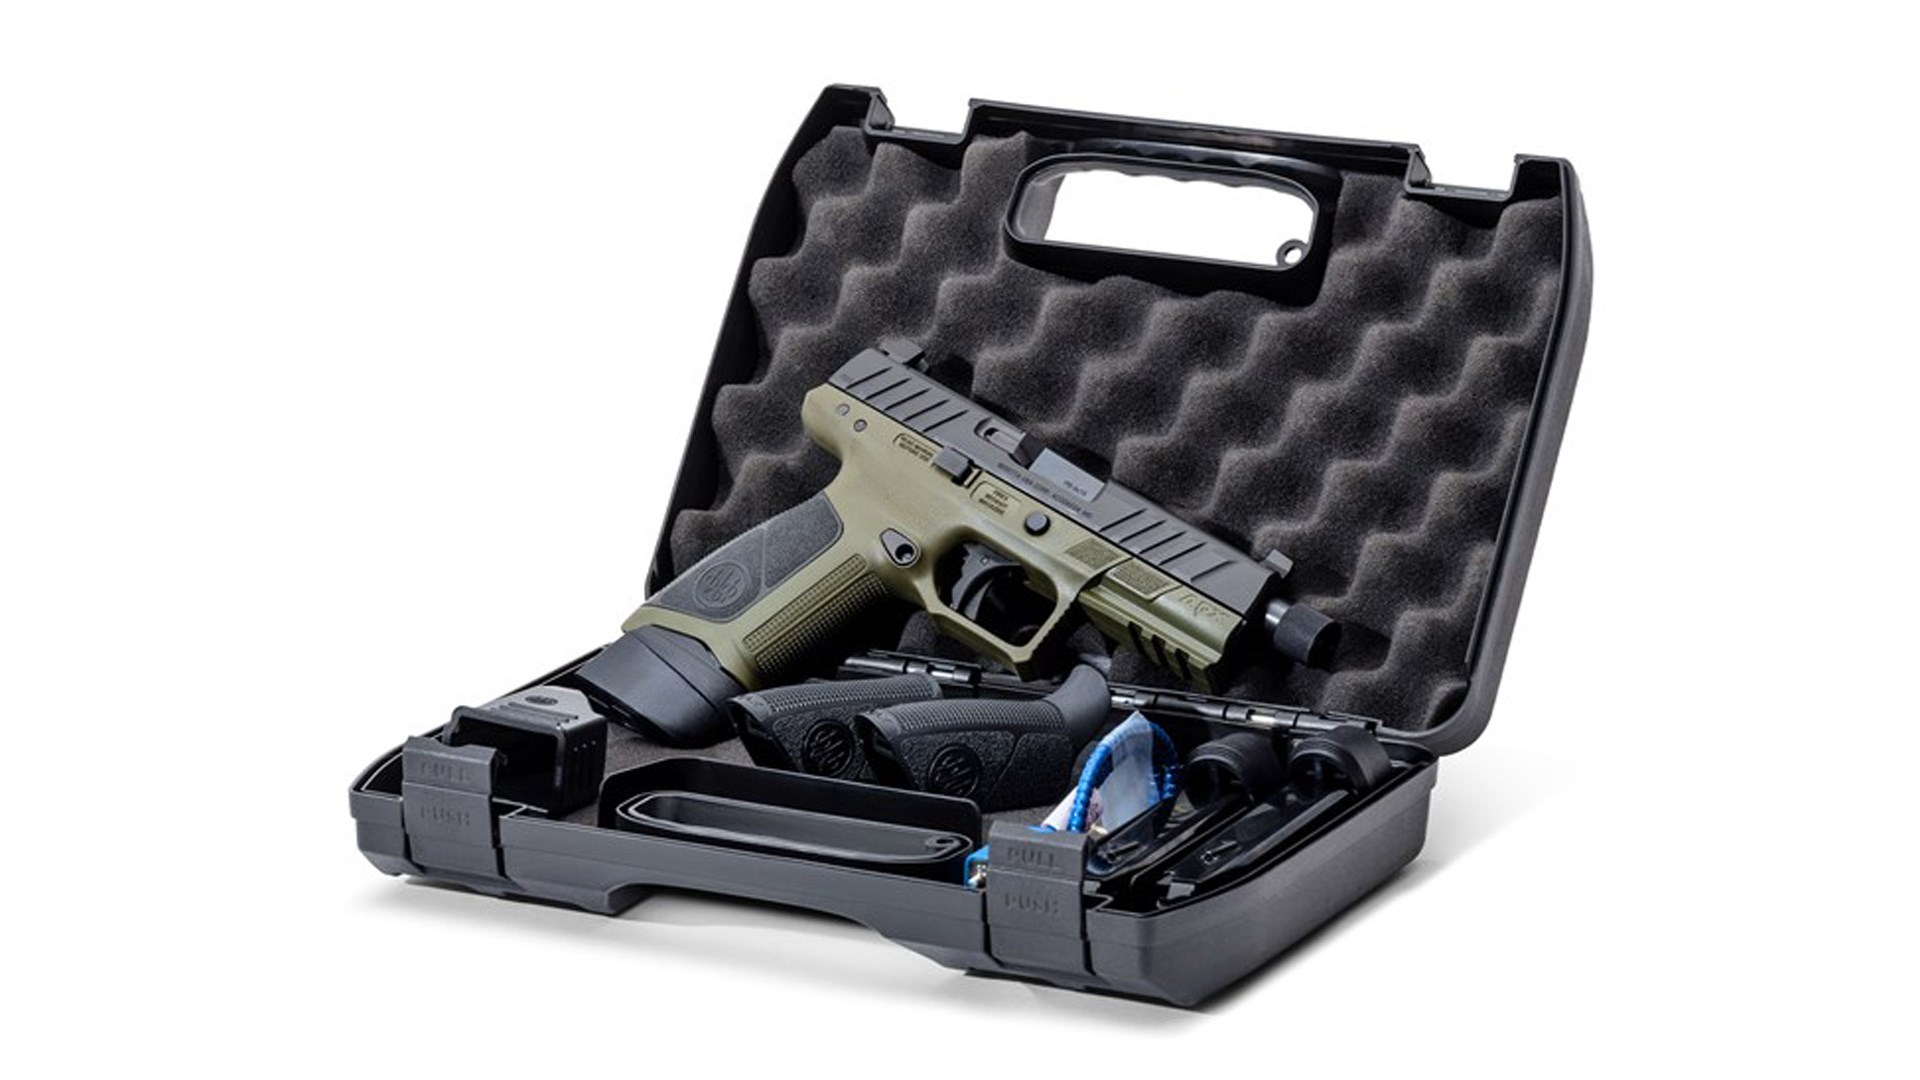 The Beretta APX A1 Tactical sitting inside a black, plastic carrying case, along with spare magazine and interchangeable black backstraps.